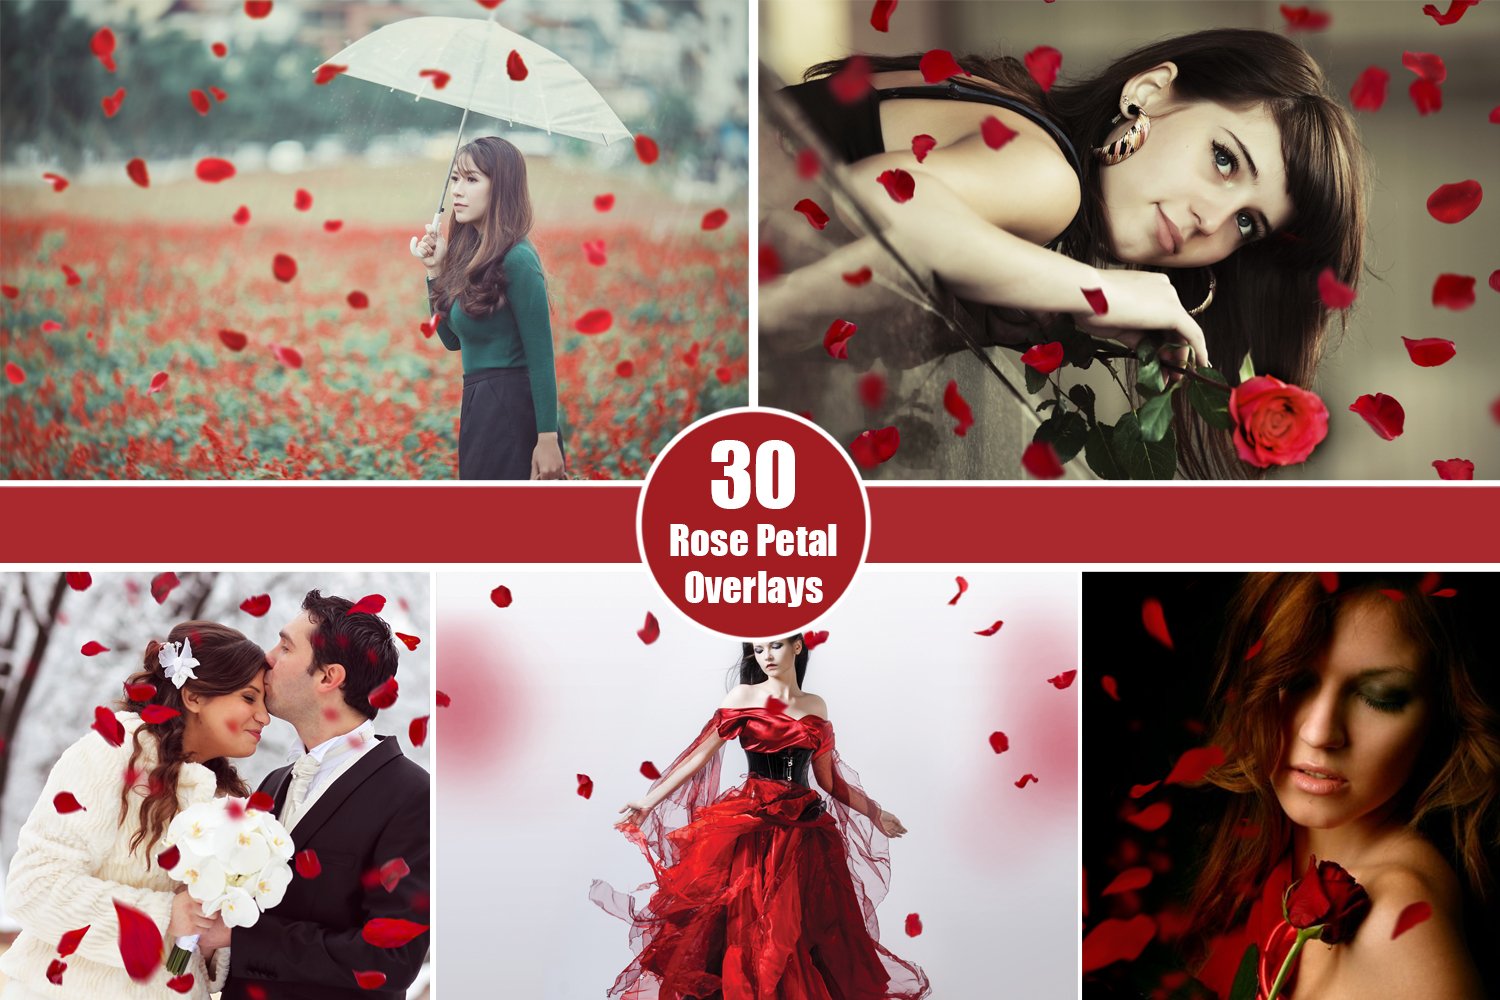 30 Falling Rose Petals Photo Overlaycover image.